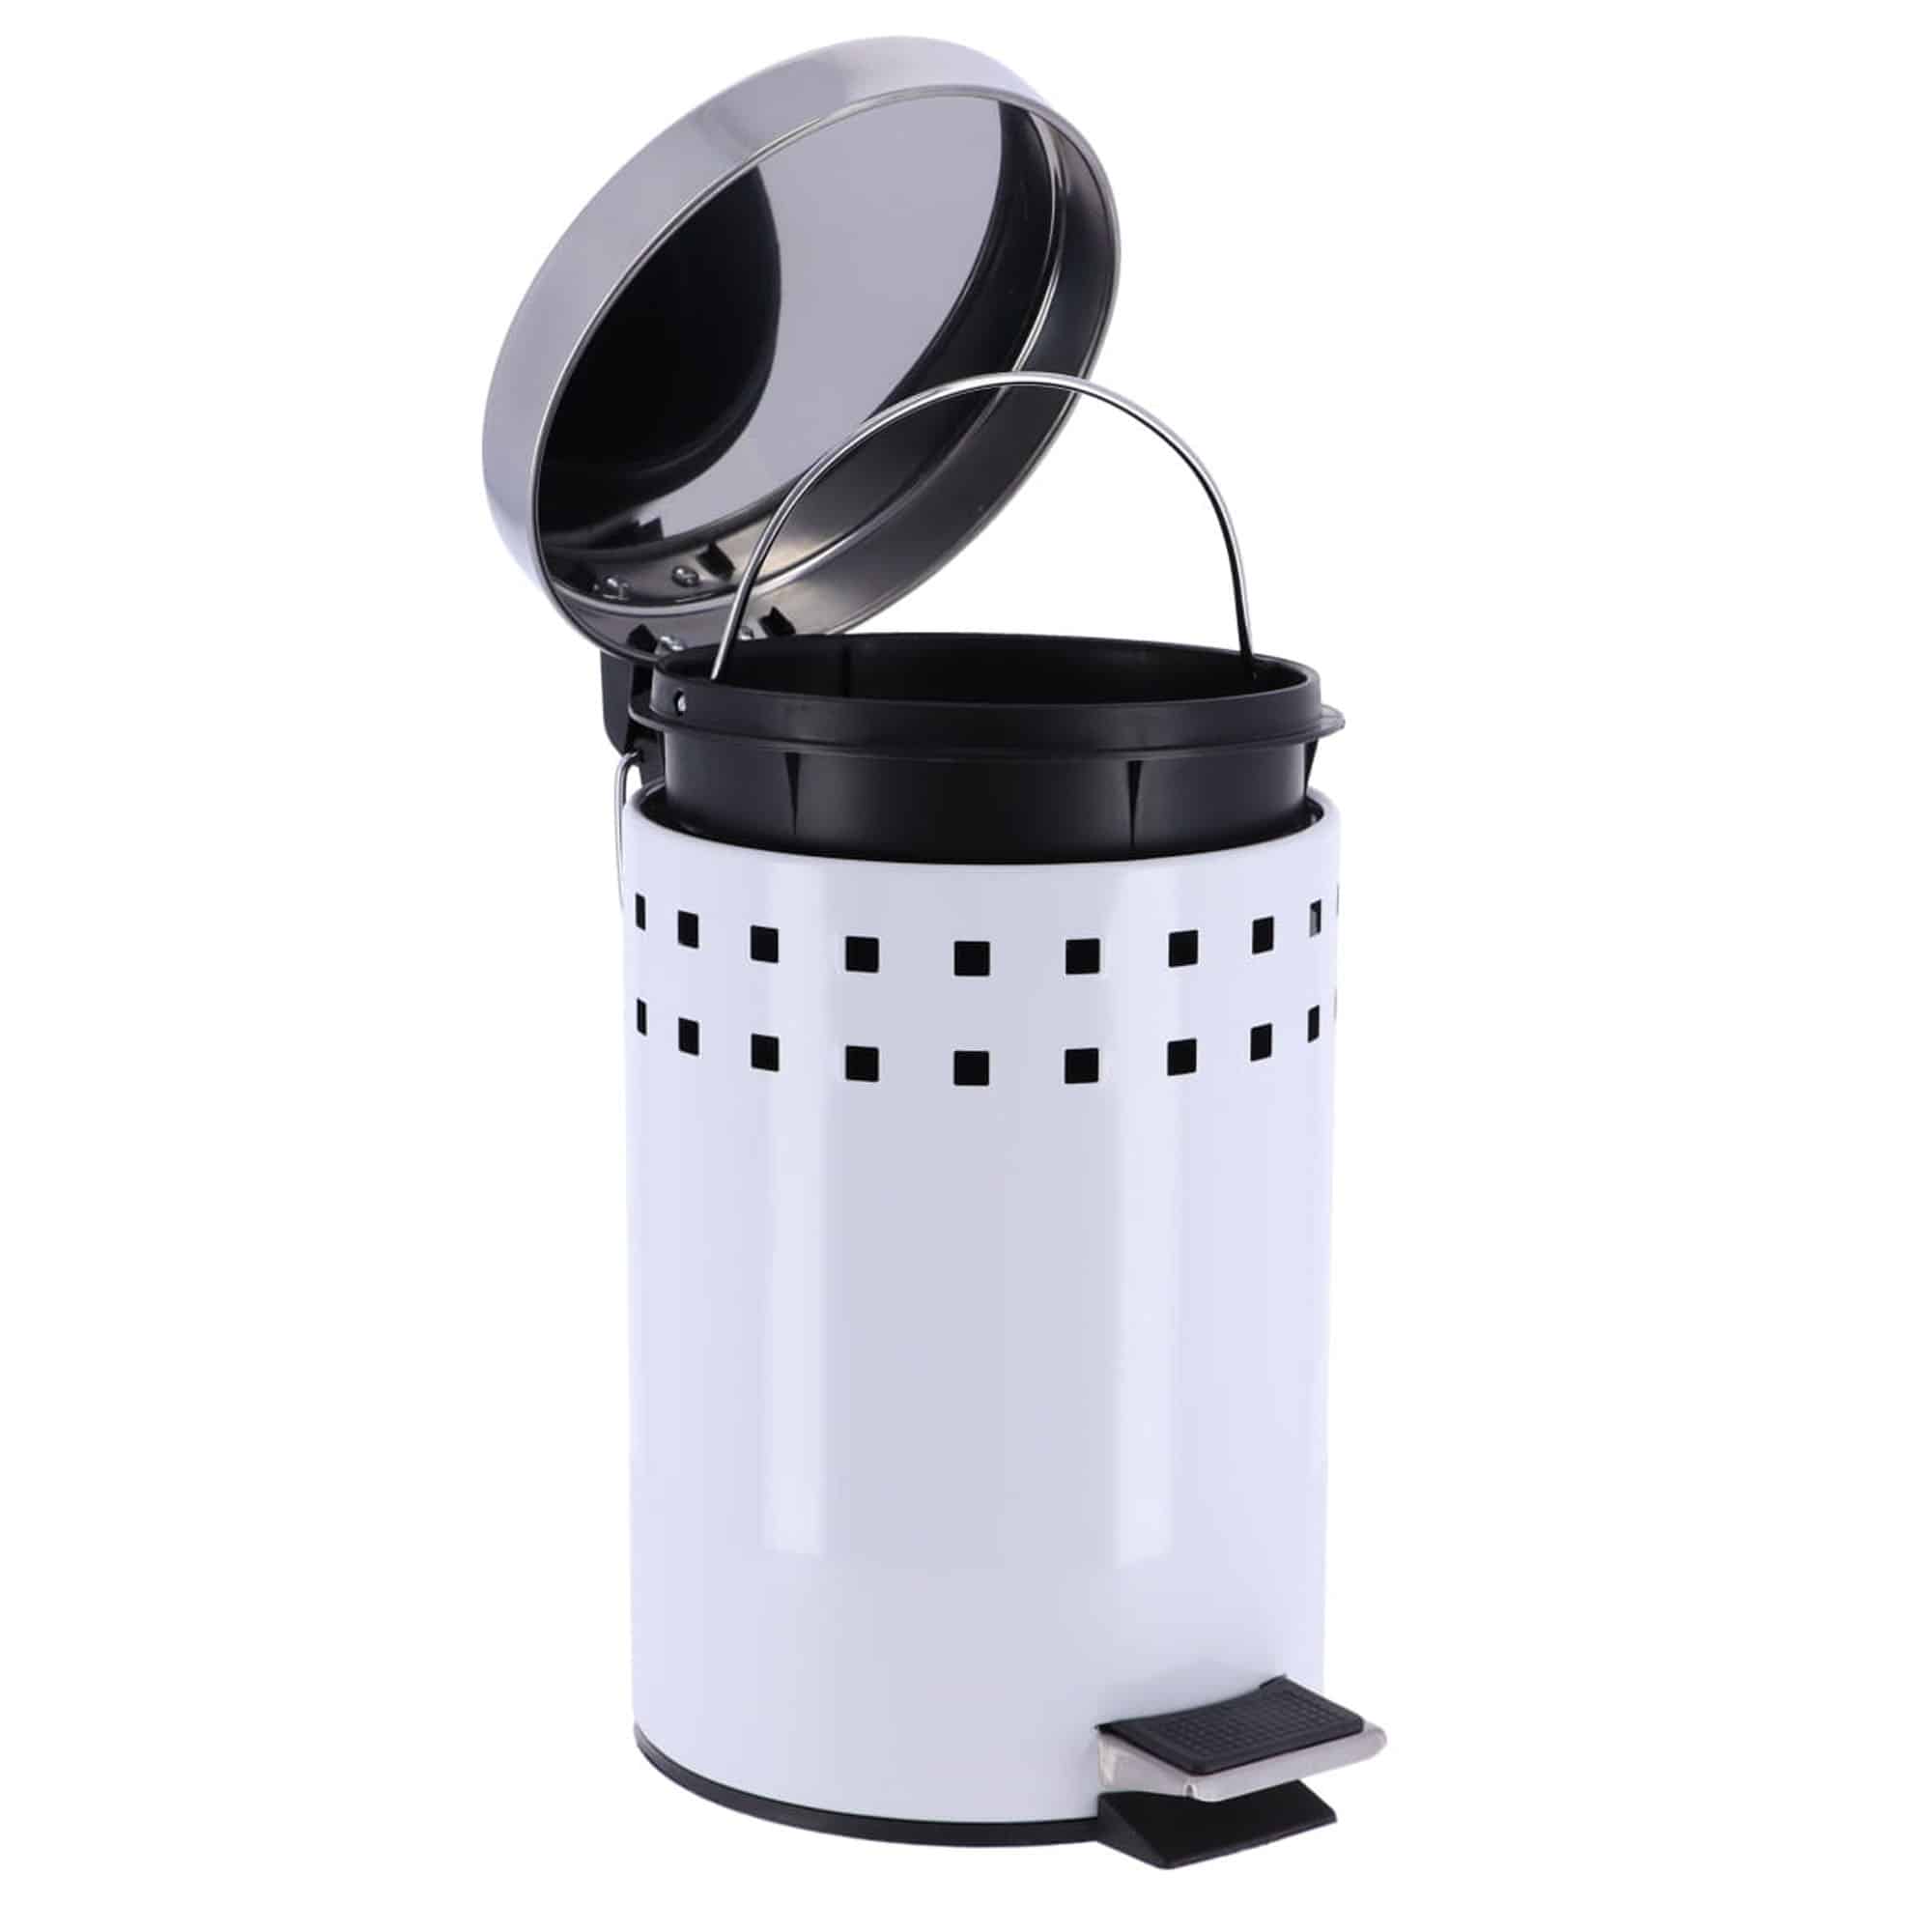 https://evideco.com/wp-content/uploads/2018/09/6502100-White-Round-Metal-Small-Step-Trash-Can-with-Lid-Waste-Bin-3-liters-0.8-gal-2.jpg